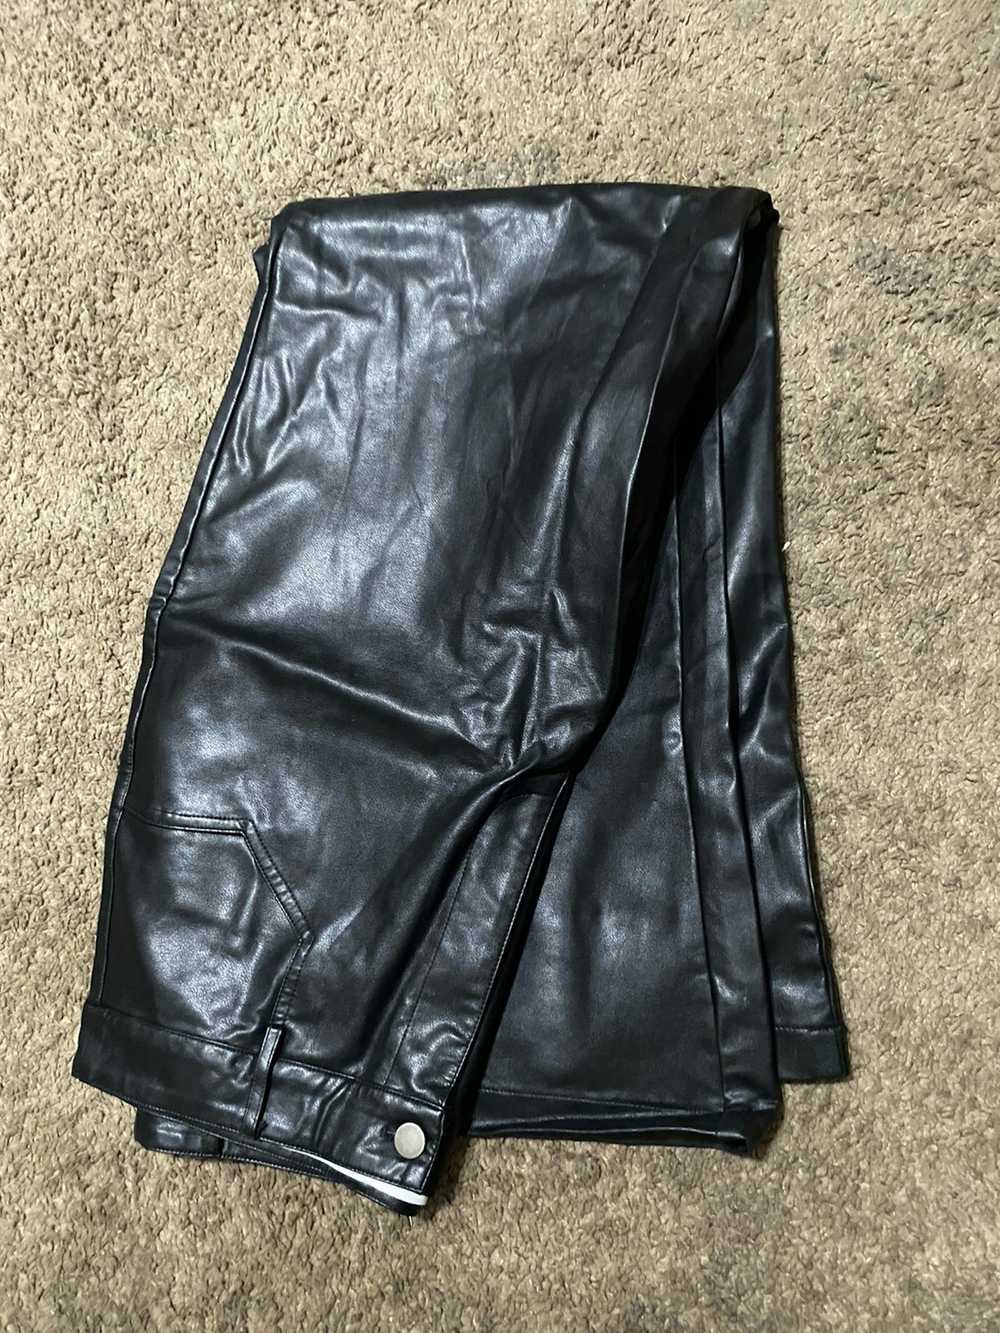 Other × Streetwear rustial leather pants - image 5